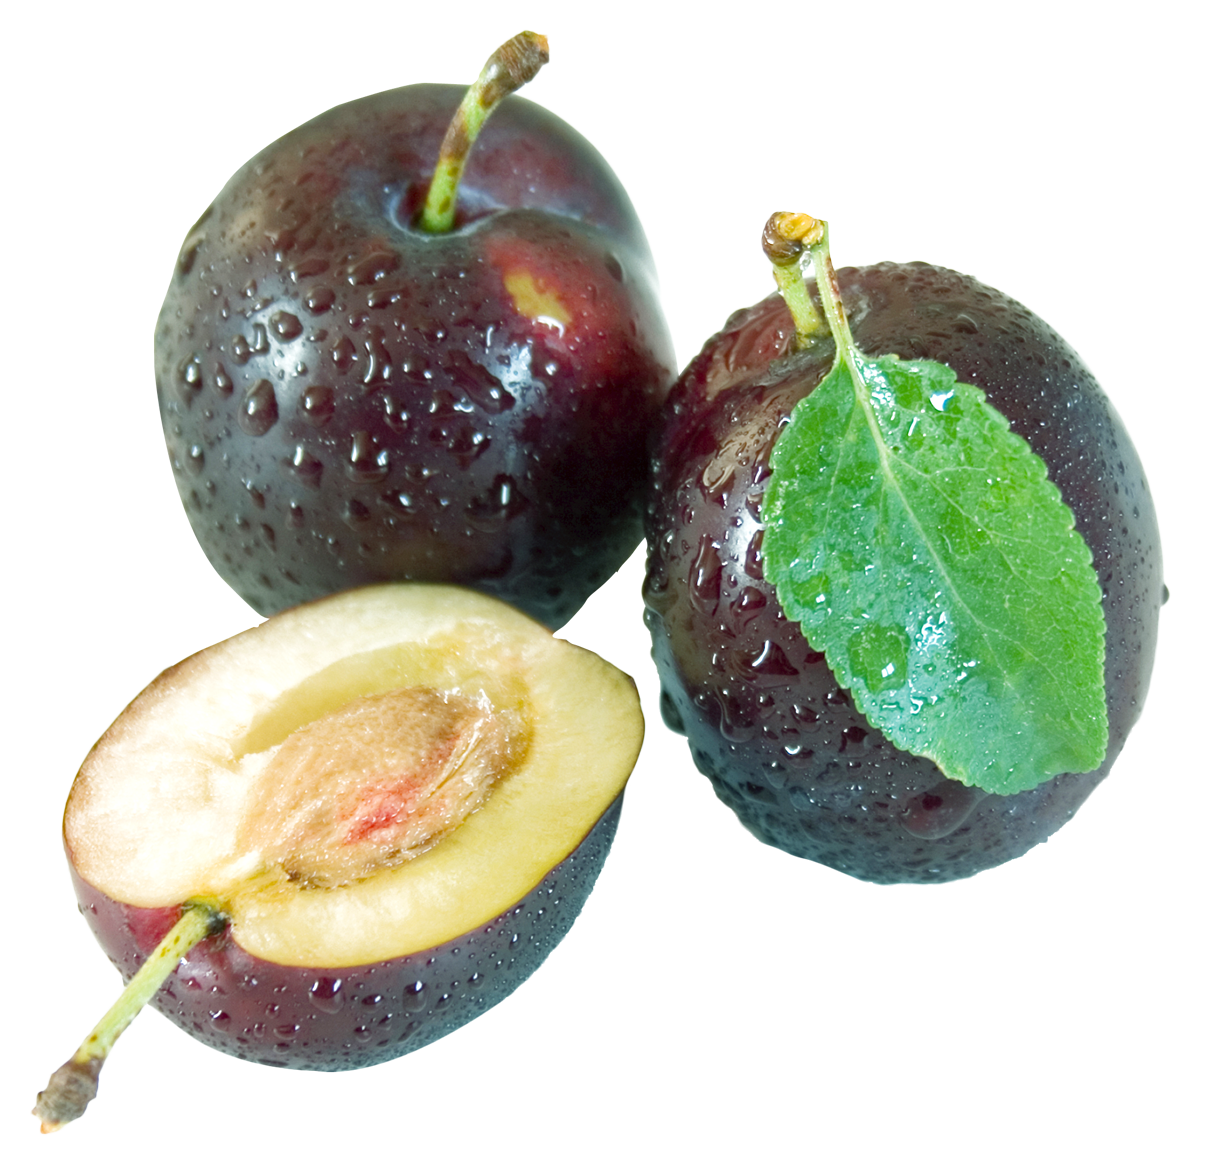 A Group Of Plums With A Leaf